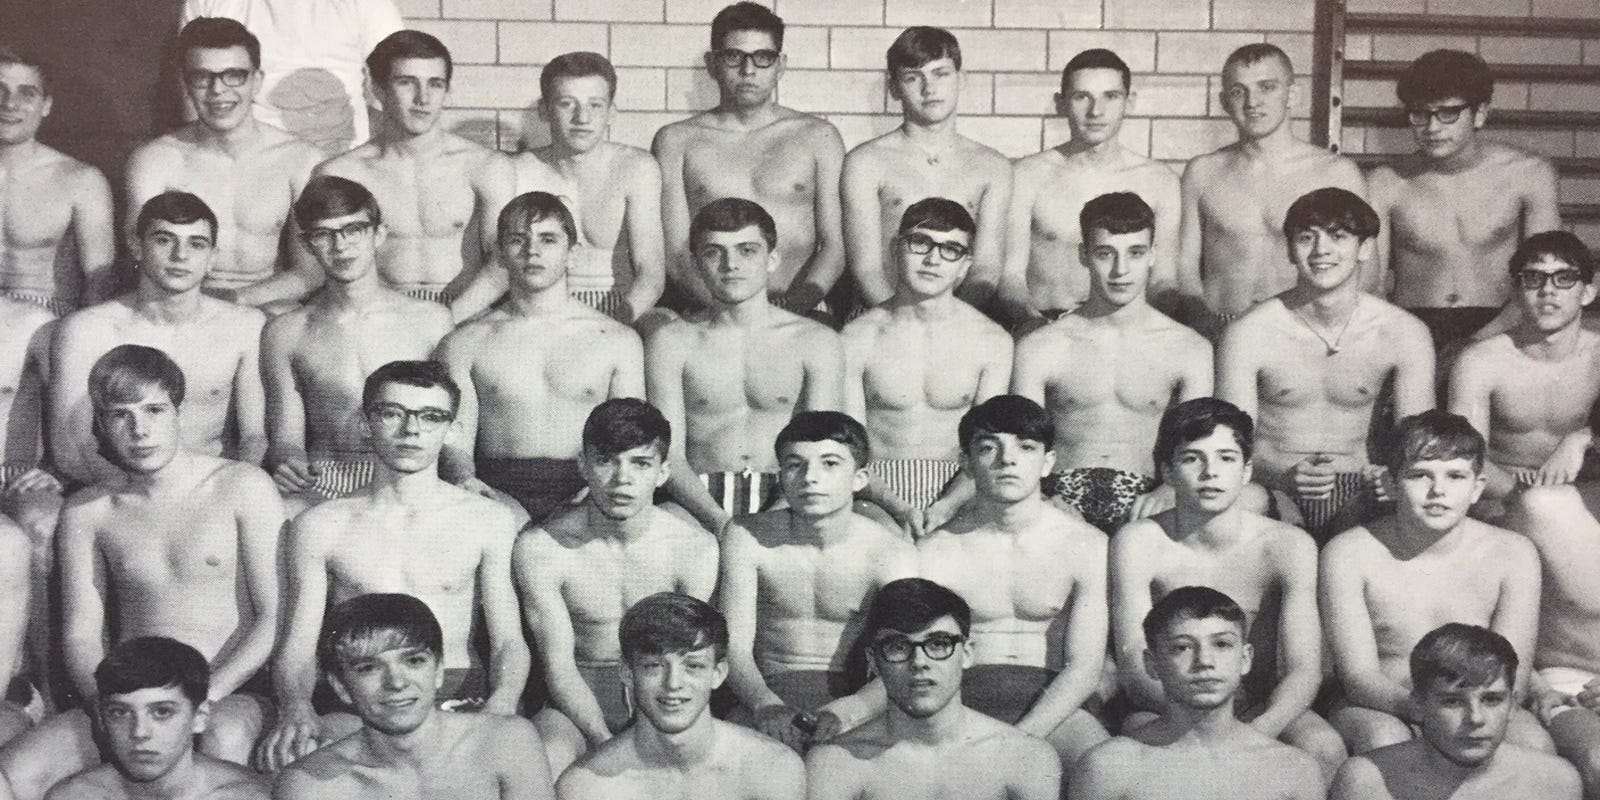 Nudist Workout Photography - Andreatta: When boys swam nude in gym class